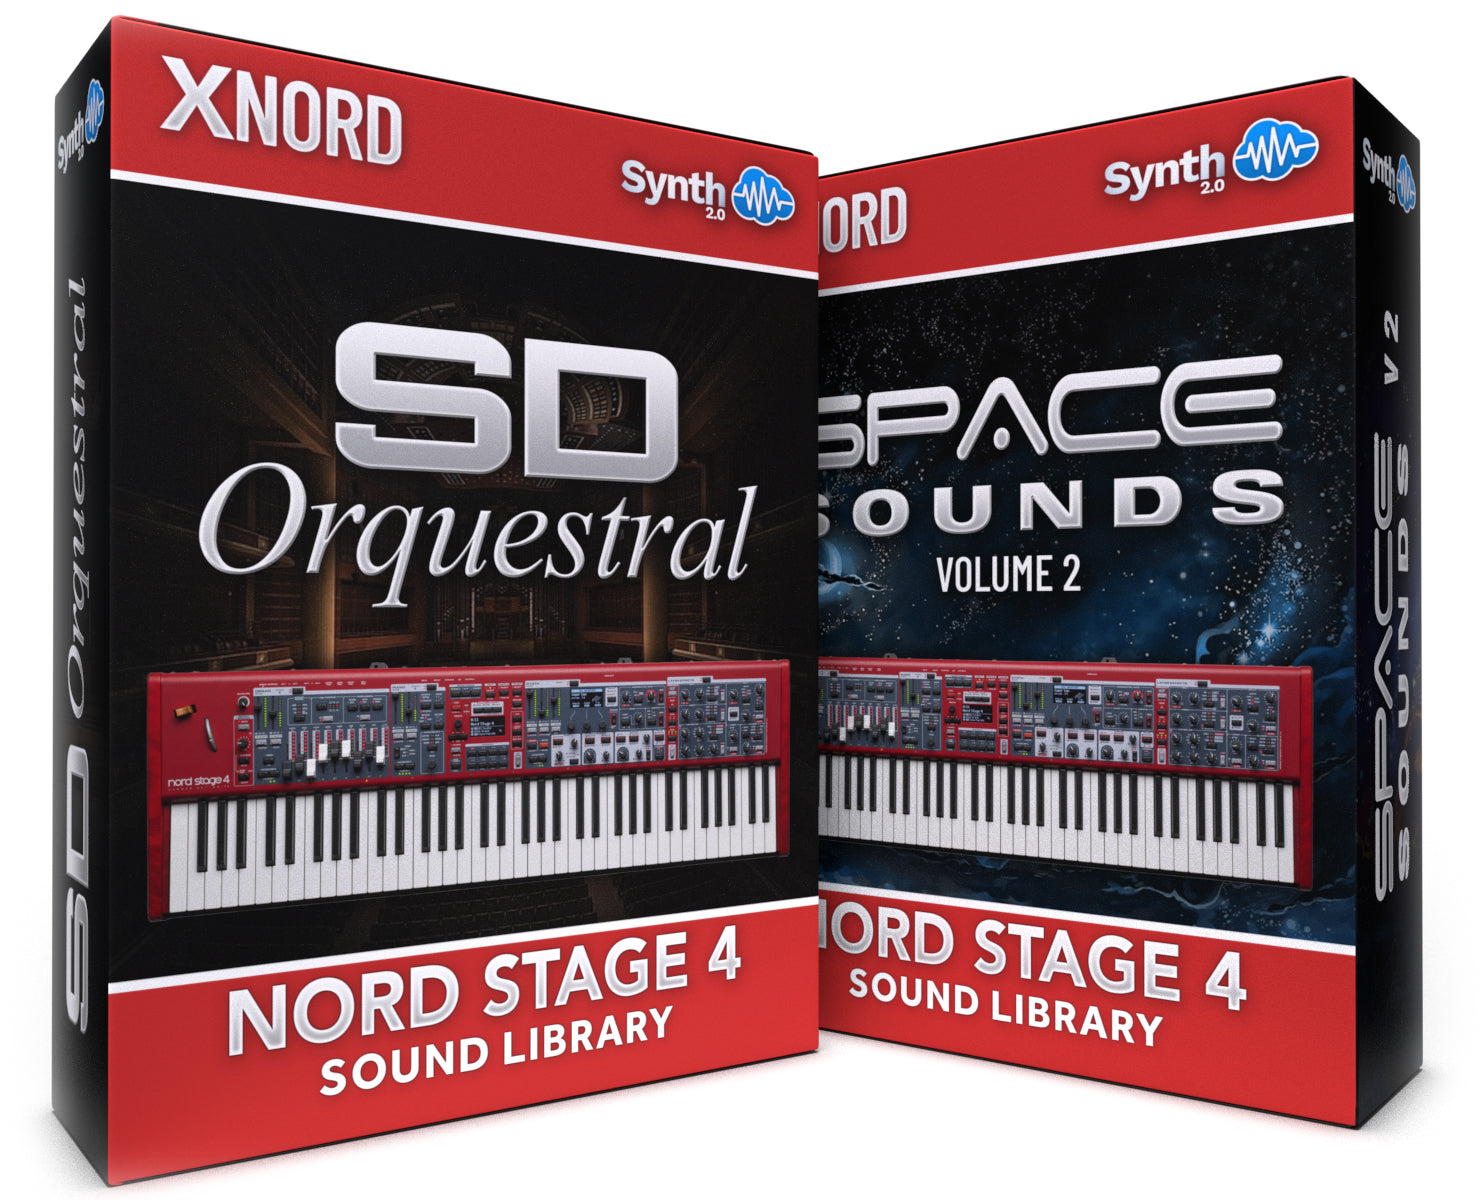 SCL426 - ( Bundle ) - SD Orquestral + Space Sounds Vol.2 - Nord Stage 4